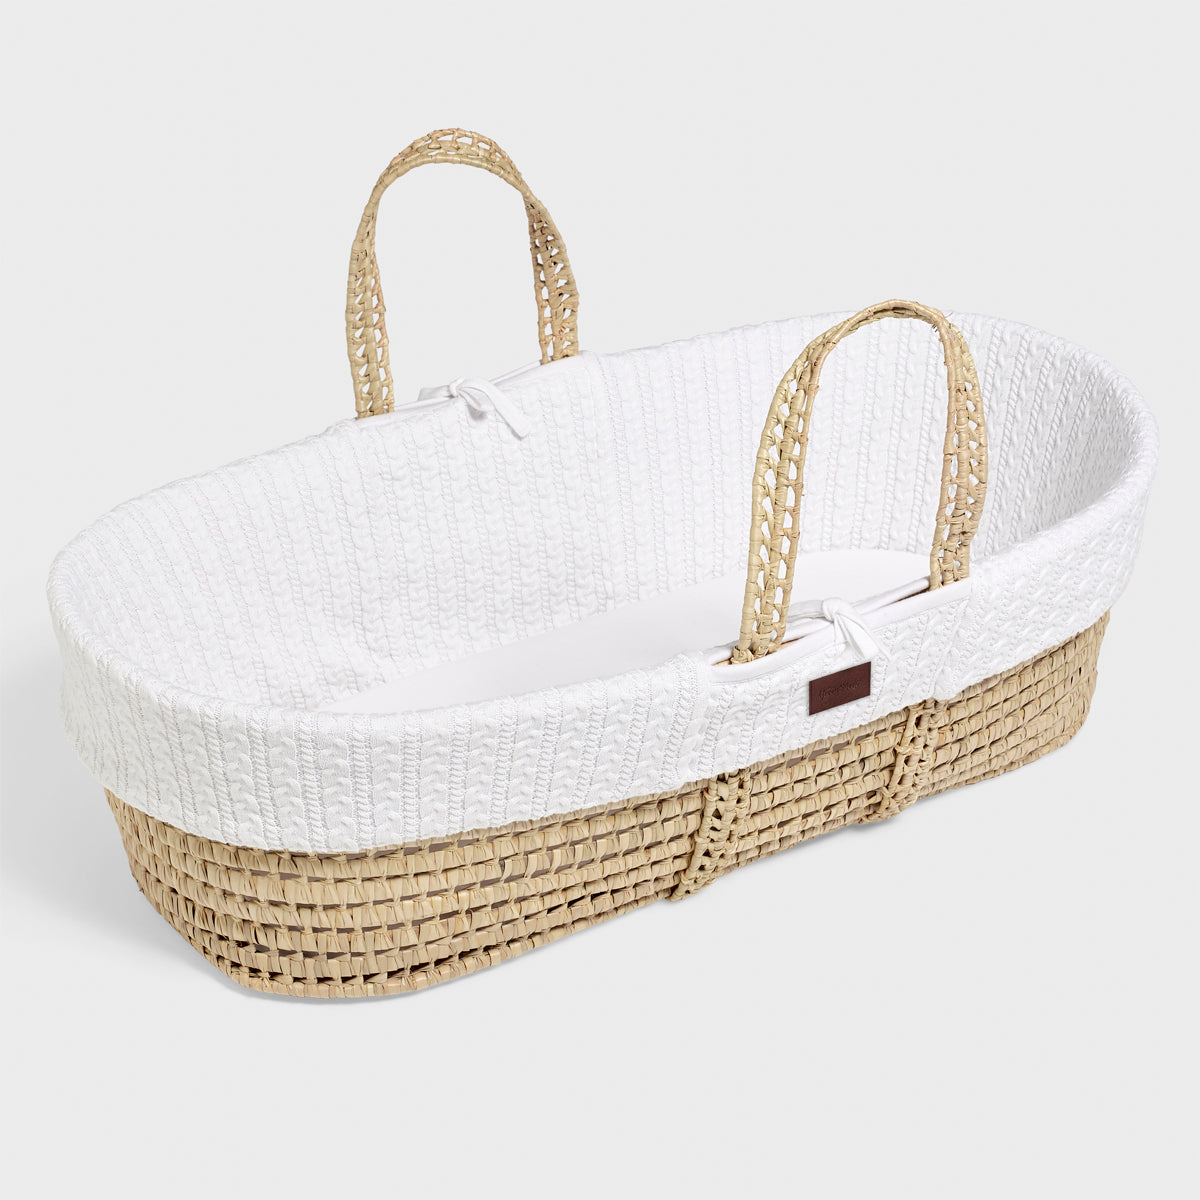 The Little Green Sheep Organic Knitted Moses Basket + Mattress - White